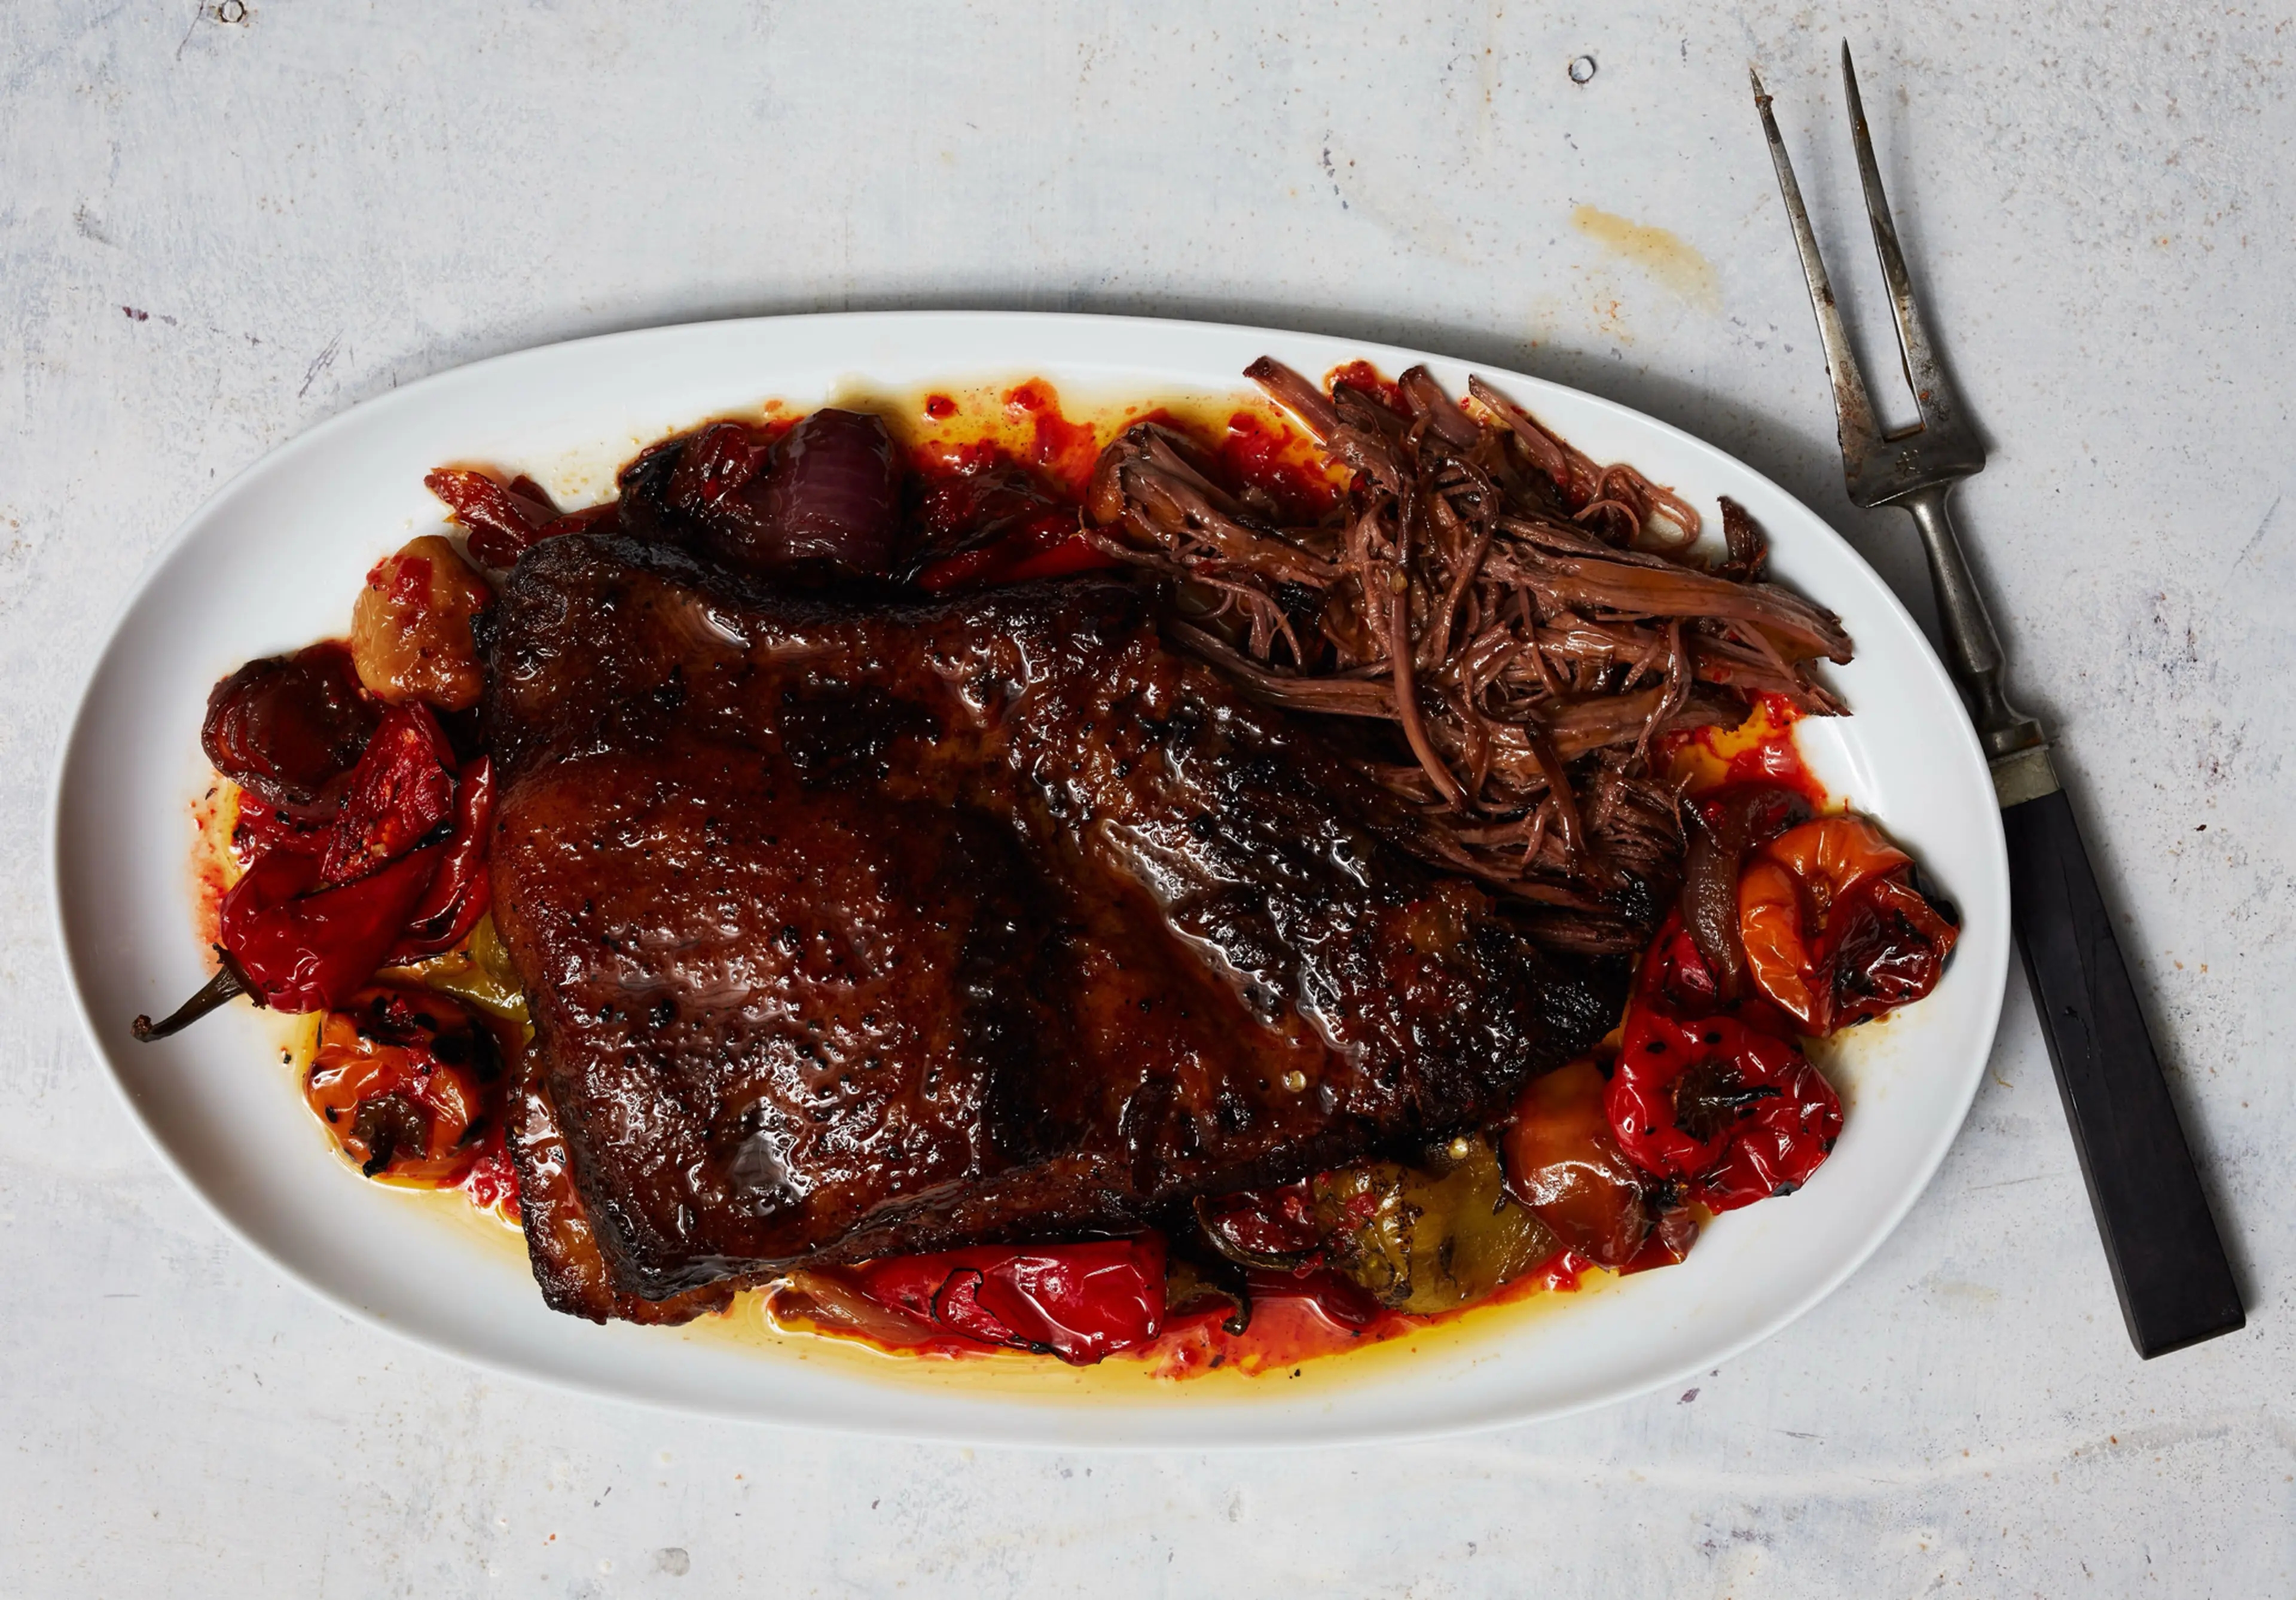 Braised Brisket with Hot Sauce and Mixed Chiles